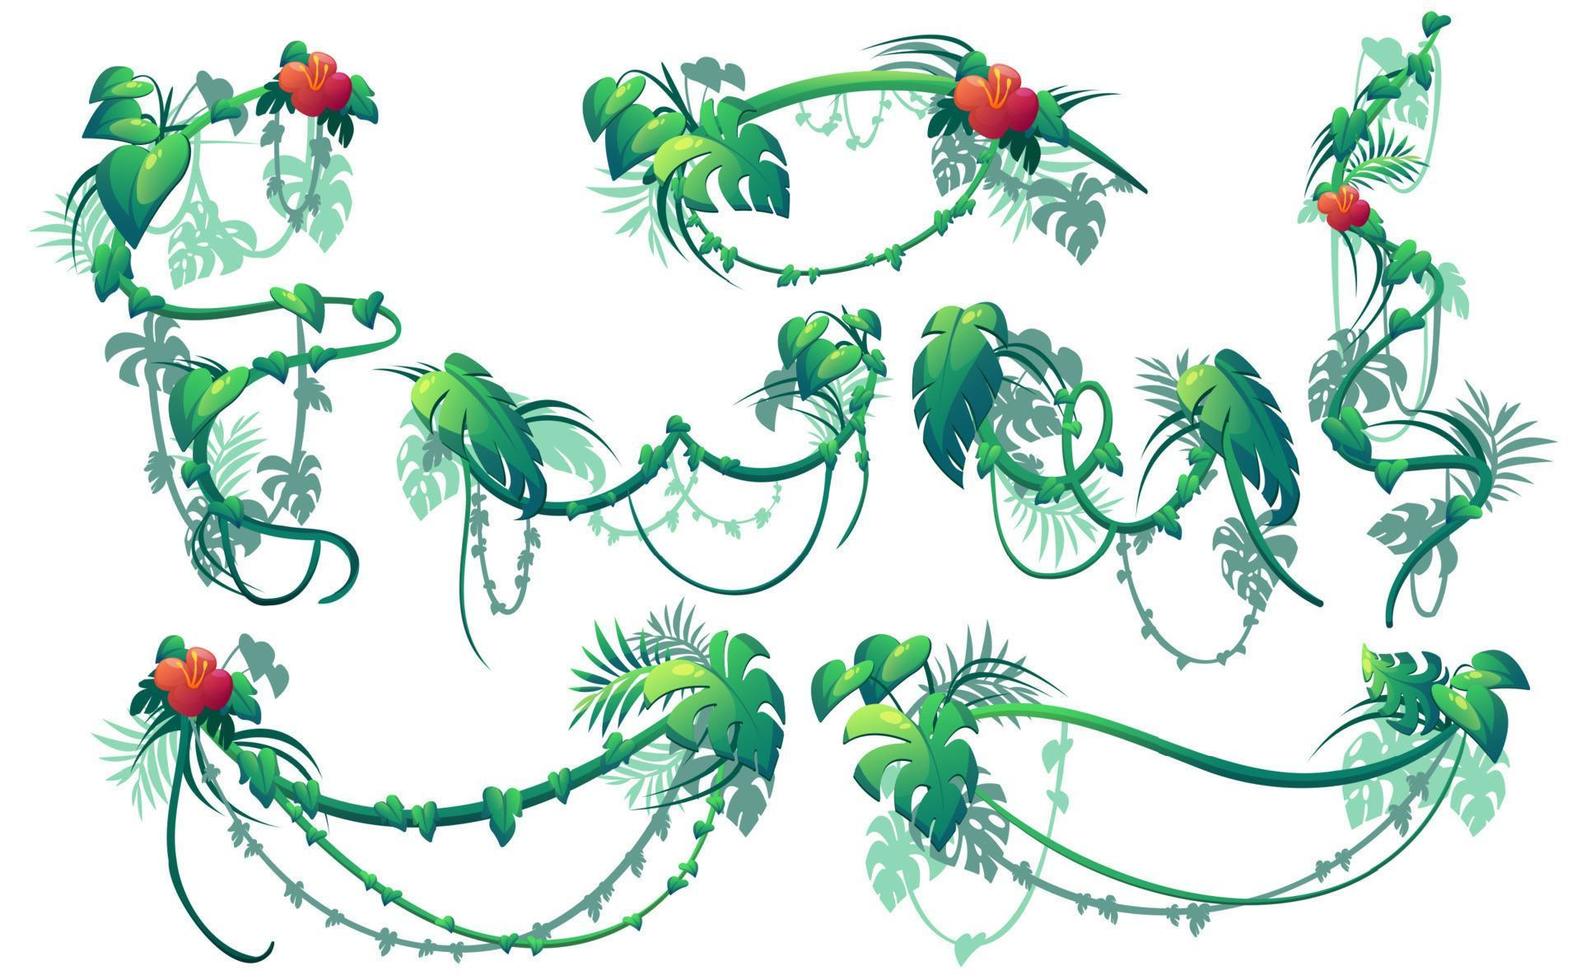 Jungle creeper plants, lianas with flowers vector